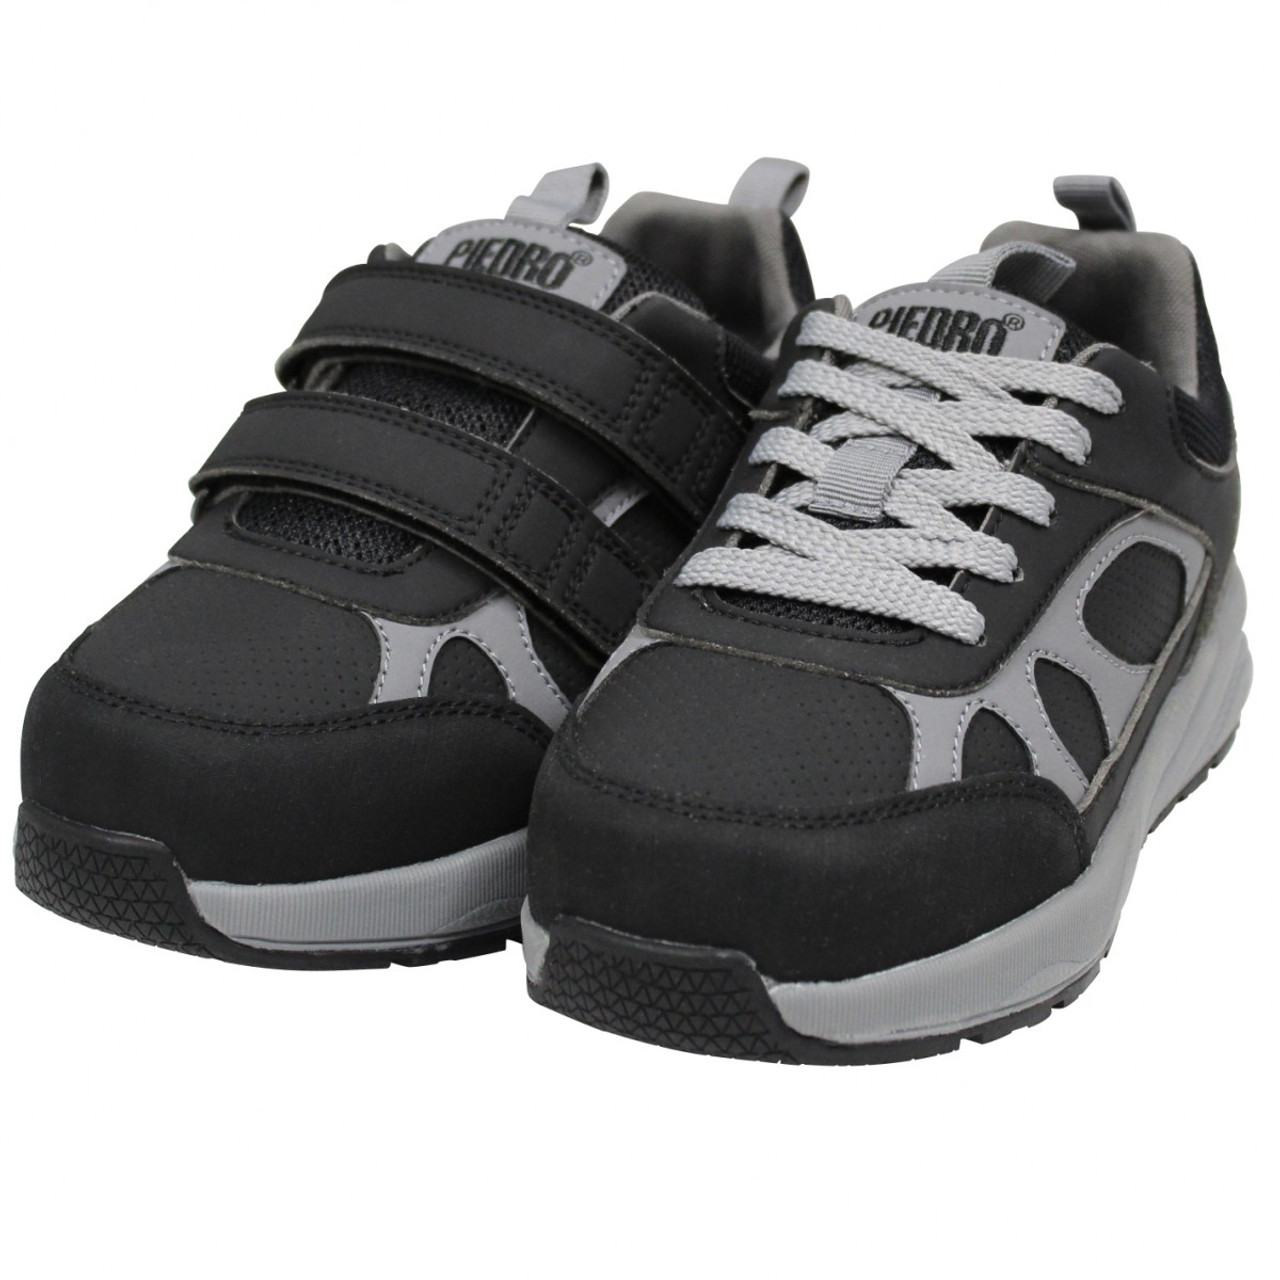 Orthotic Shop: High-Quality Orthopedic Shoes & Foot Care Products Online